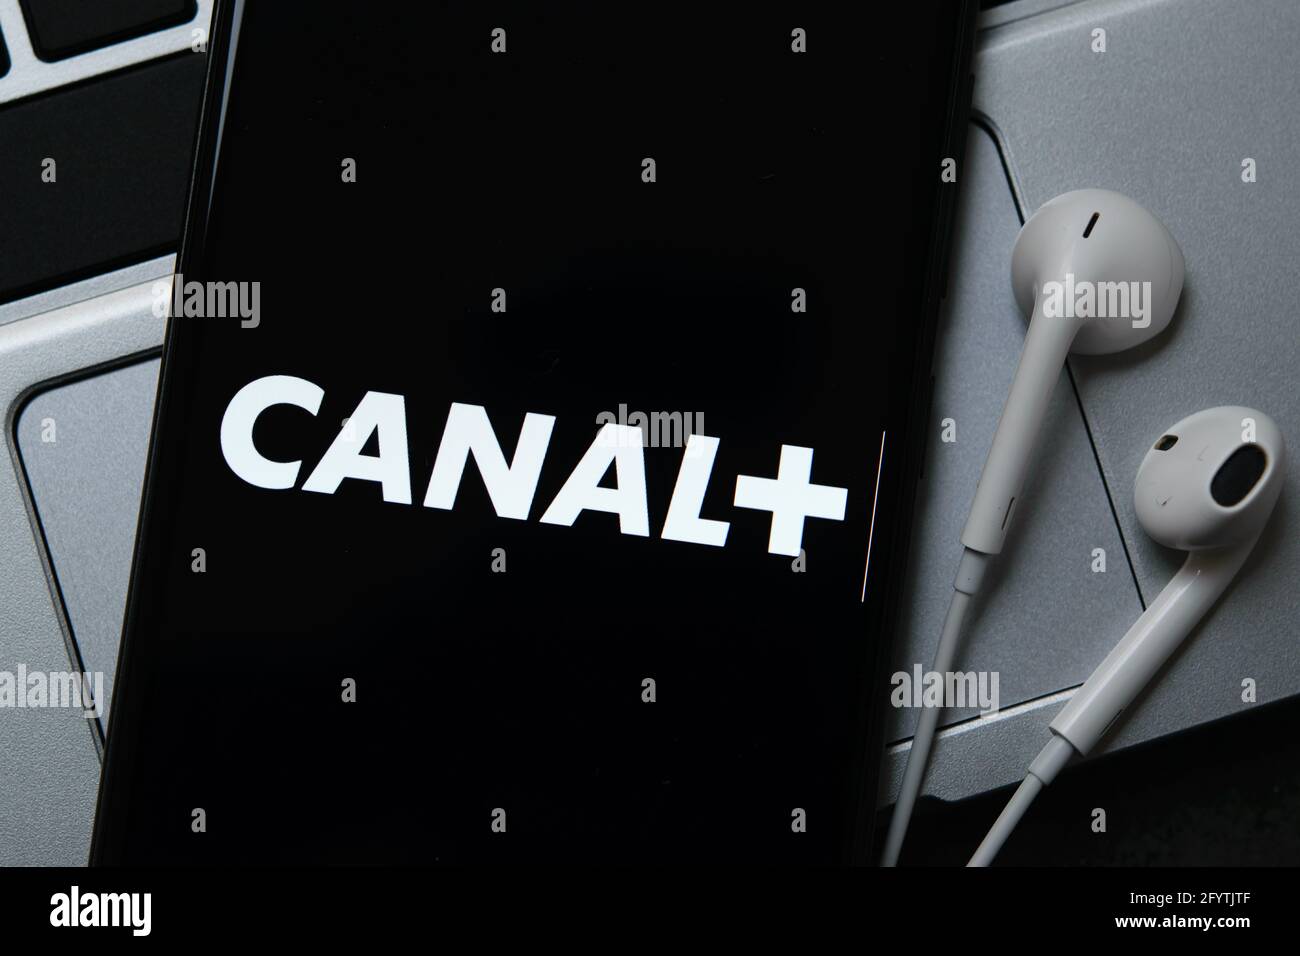 Krakow, Poland - October 07, 2020: Canal+ (Plus) application sign on the smartphone screen. Canal+ is a famous provider of Internet streaming  service Stock Photo